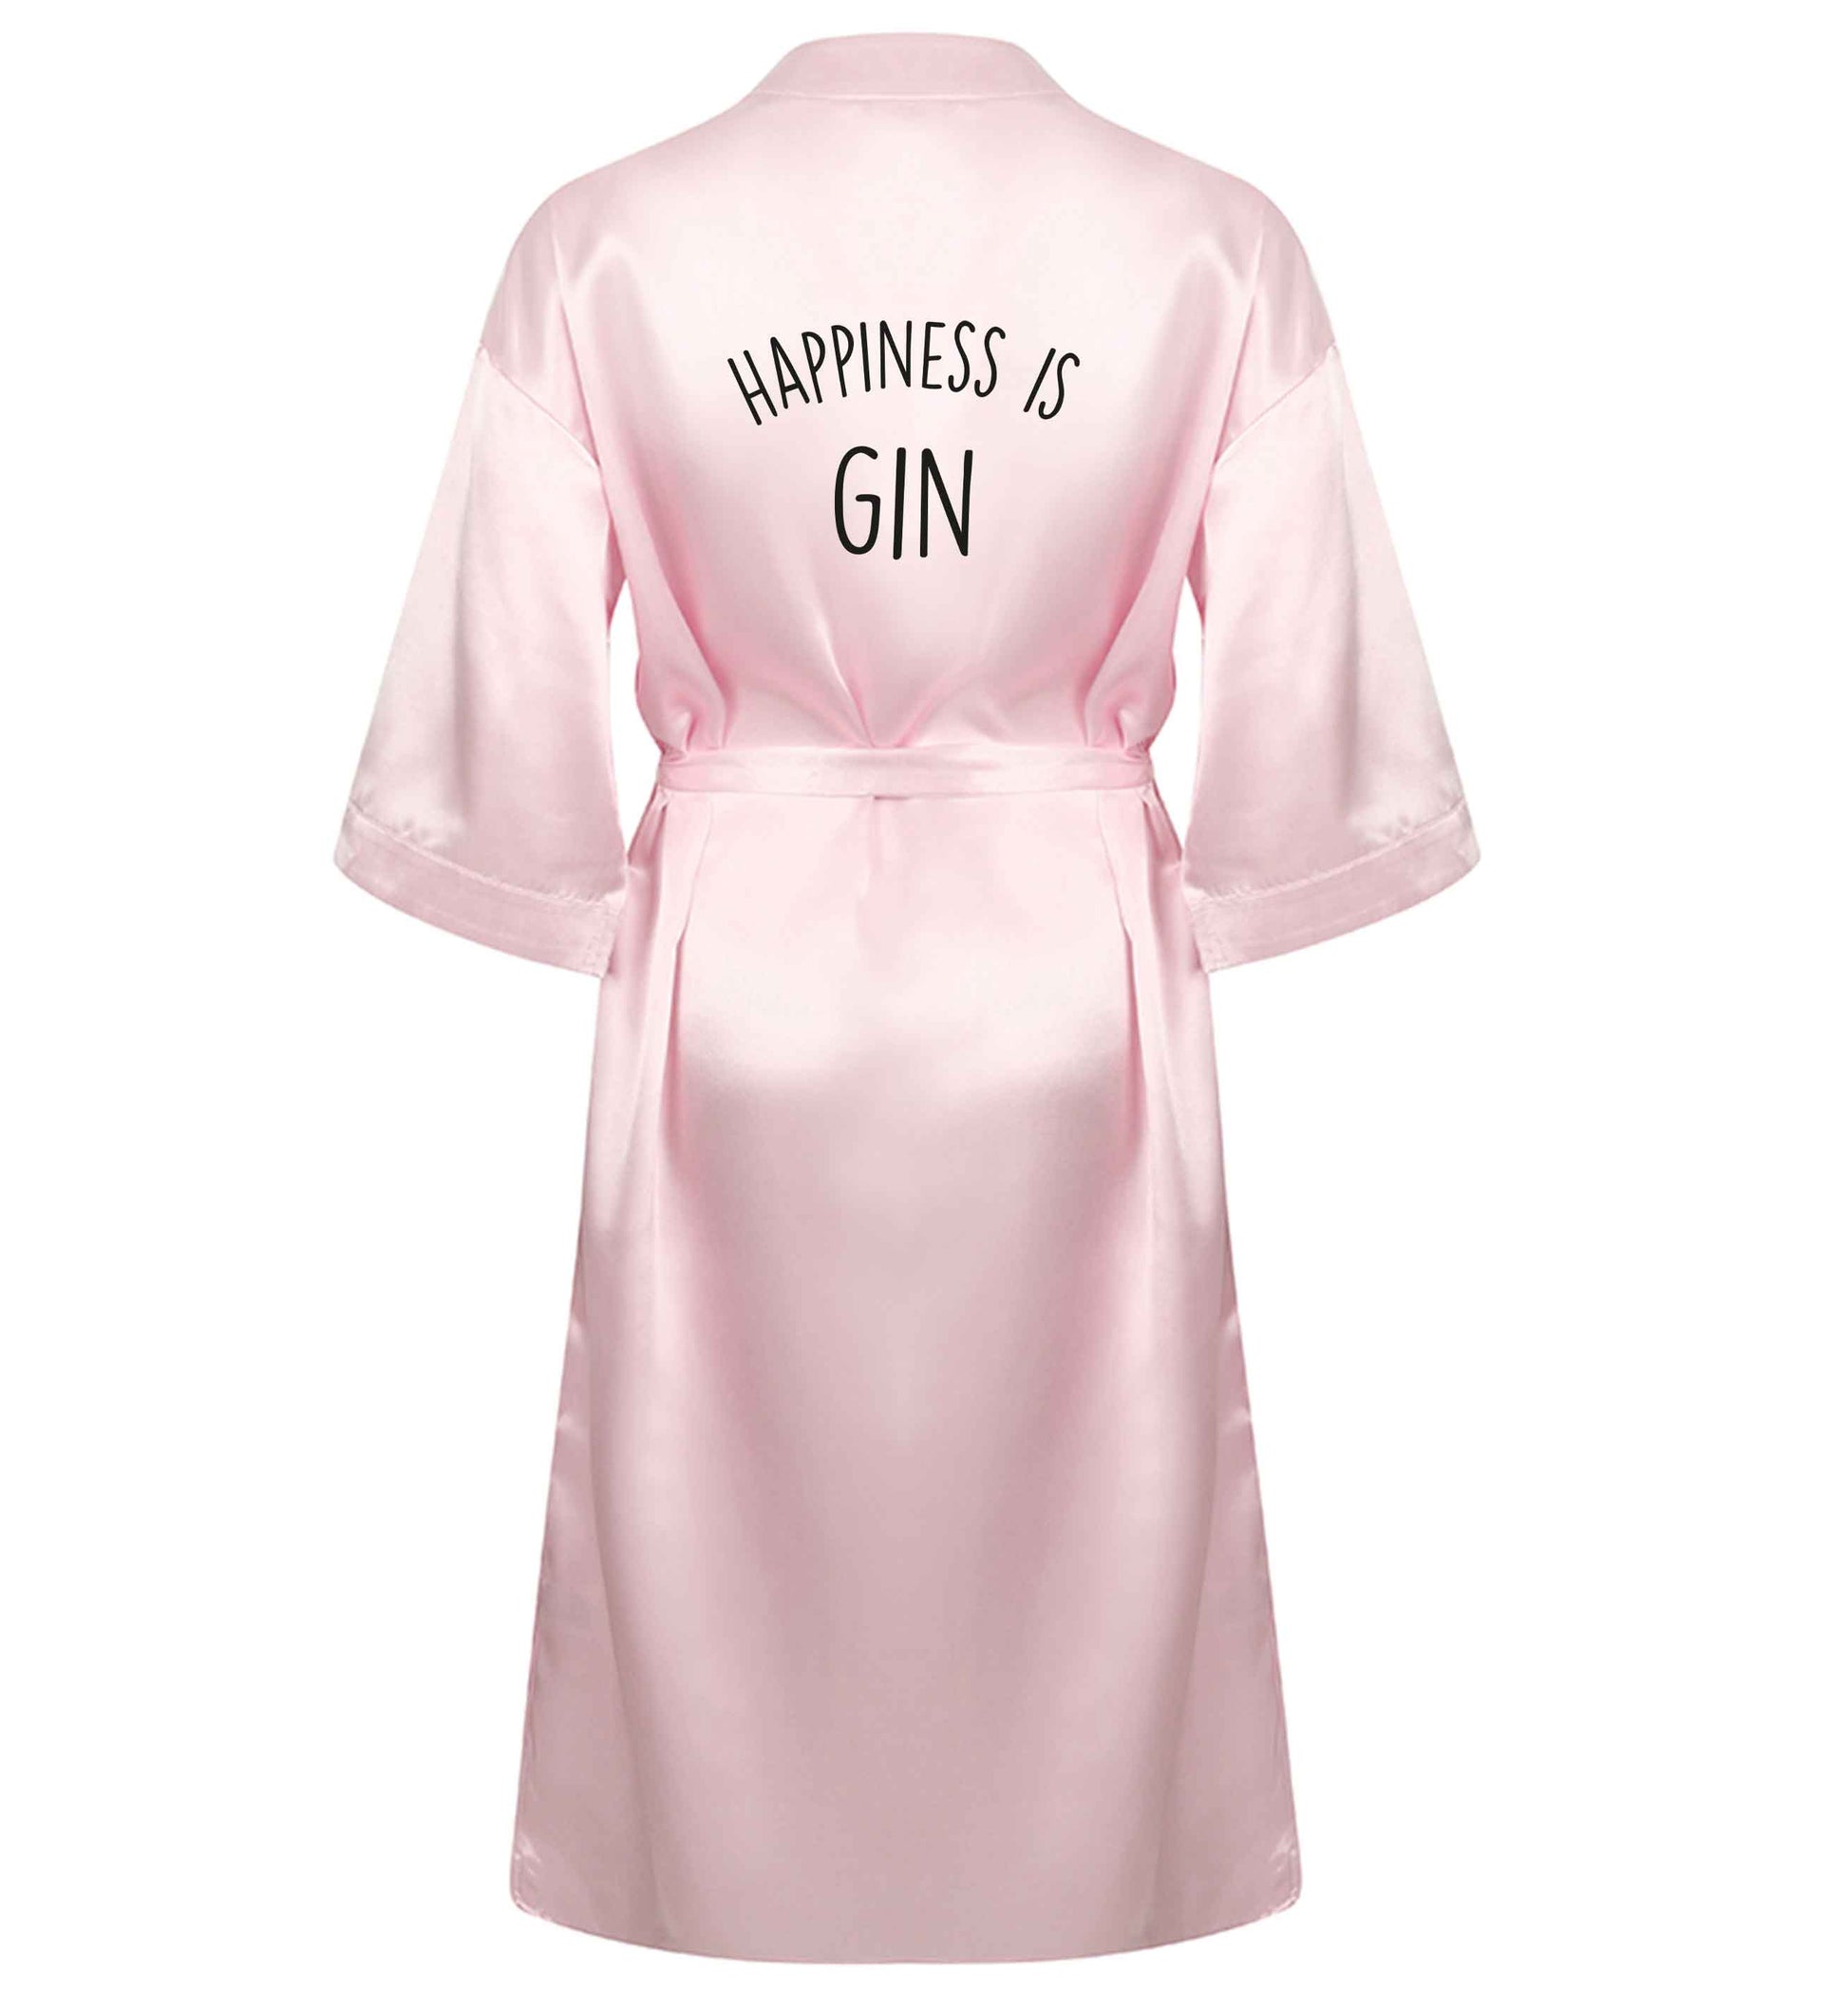 Happiness is gin XL/XXL pink ladies dressing gown size 16/18